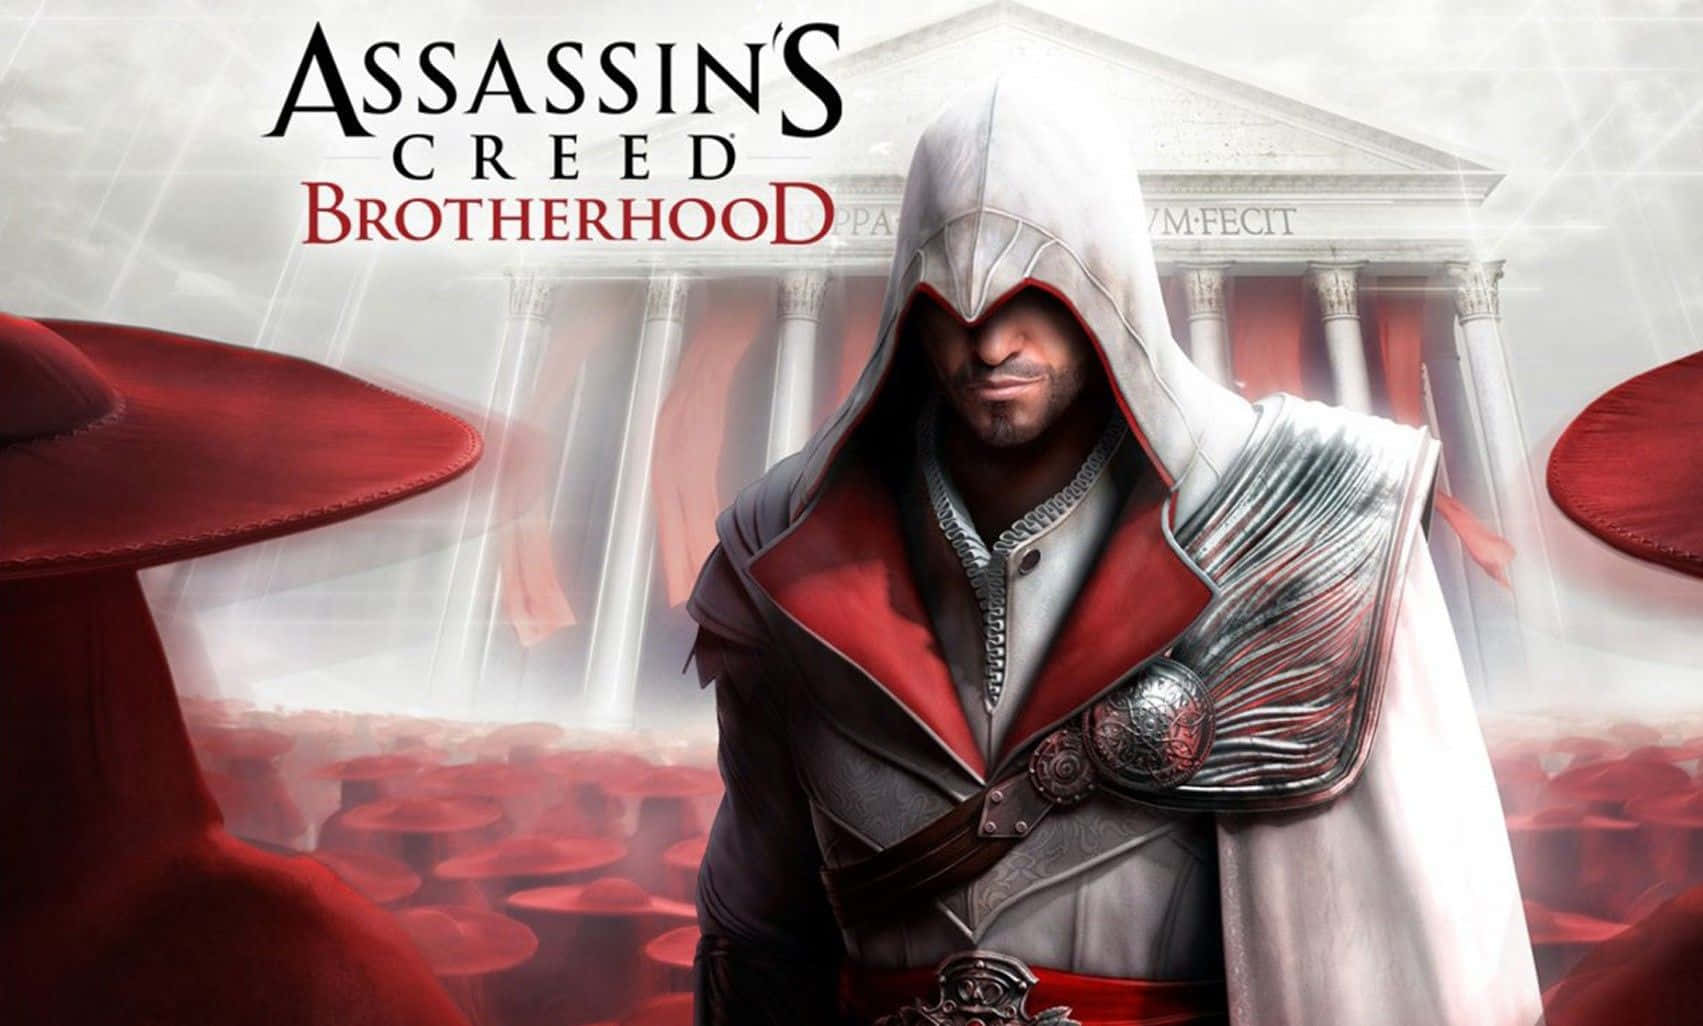 Ezio Auditore in front of a magnificent Italian cityscape in Assassin's Creed Brotherhood Wallpaper